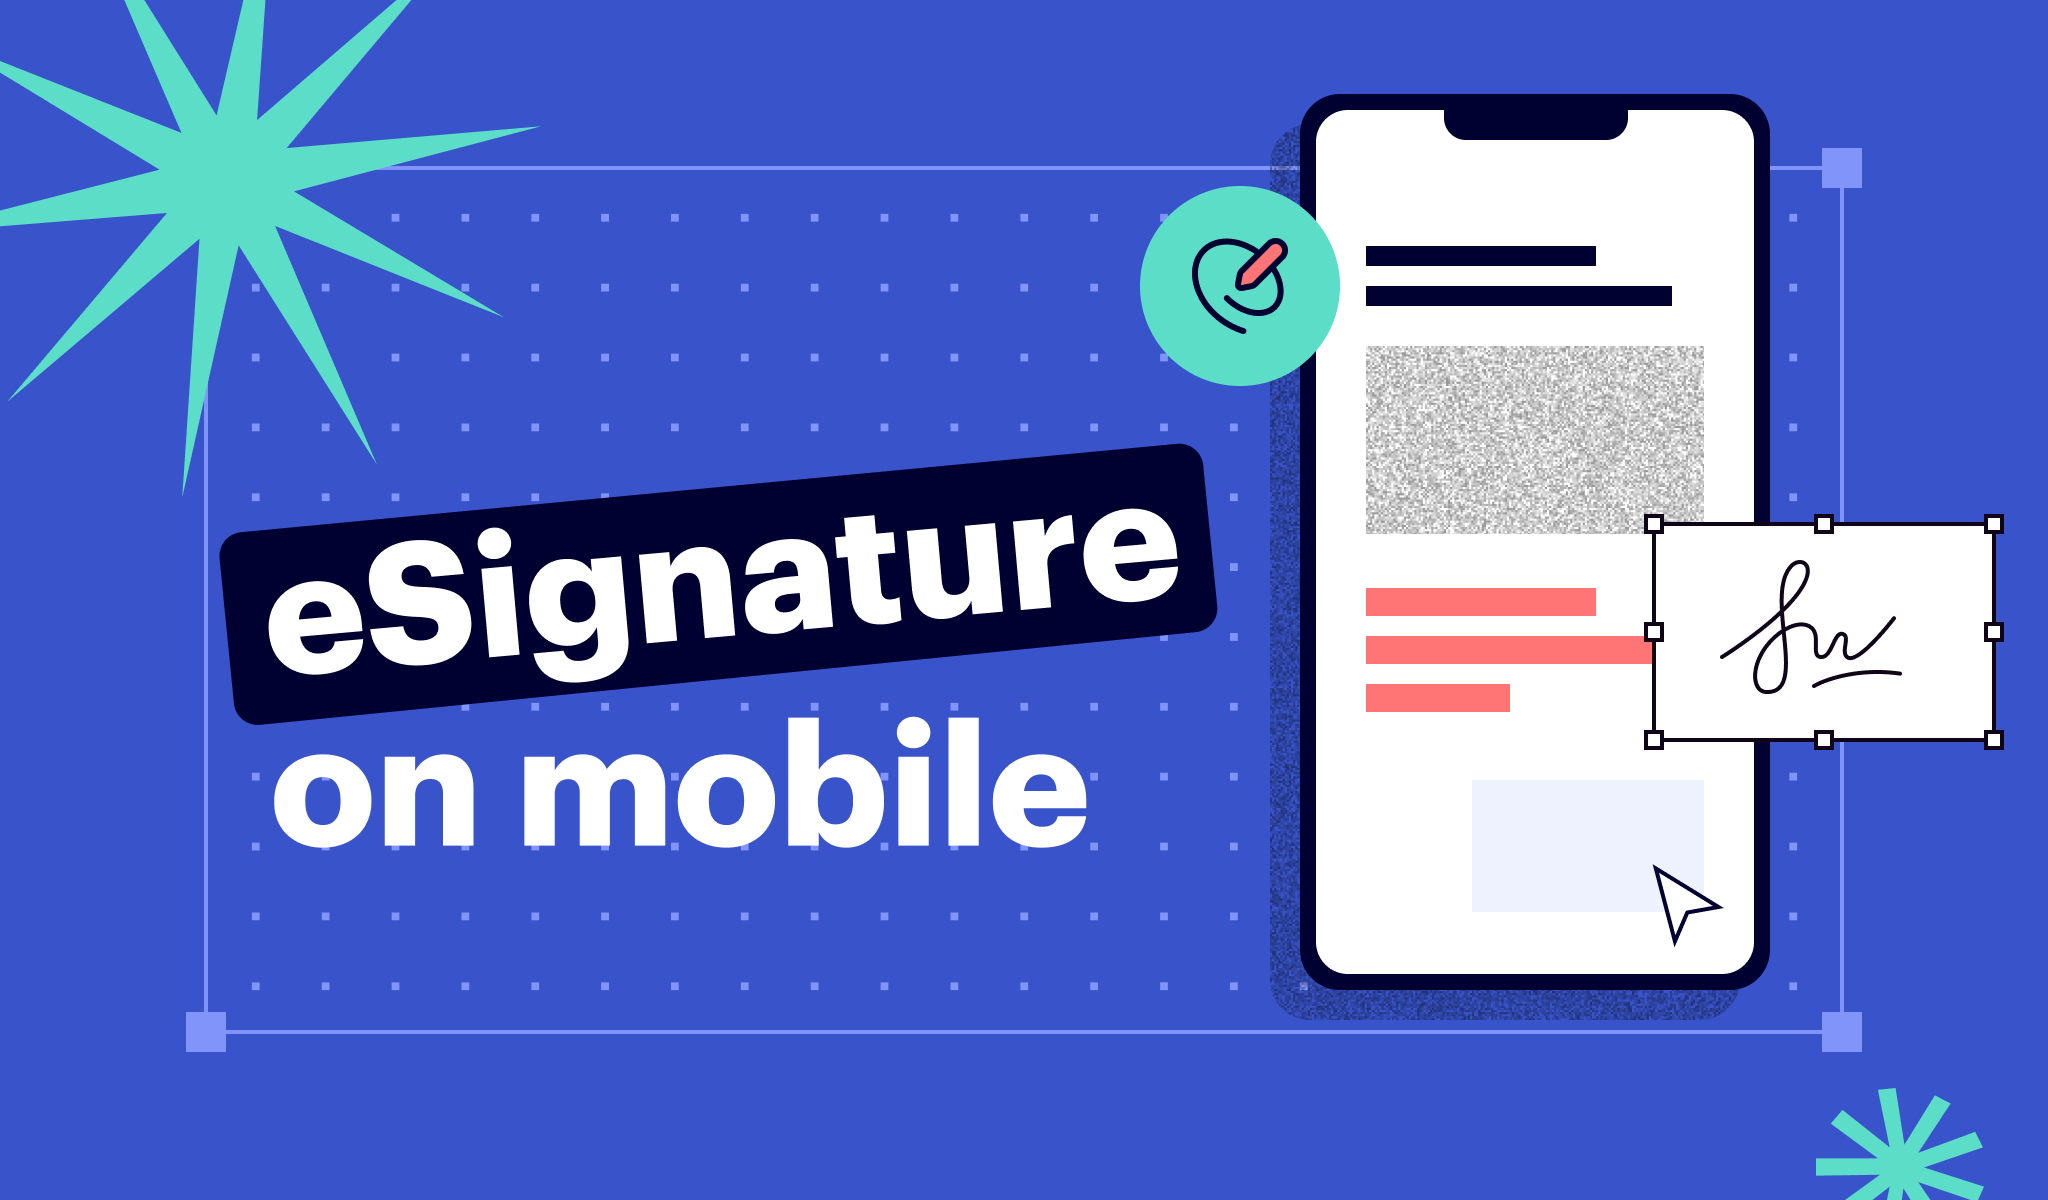 learn how to text message signatures on iPhone and Android devices using signNow